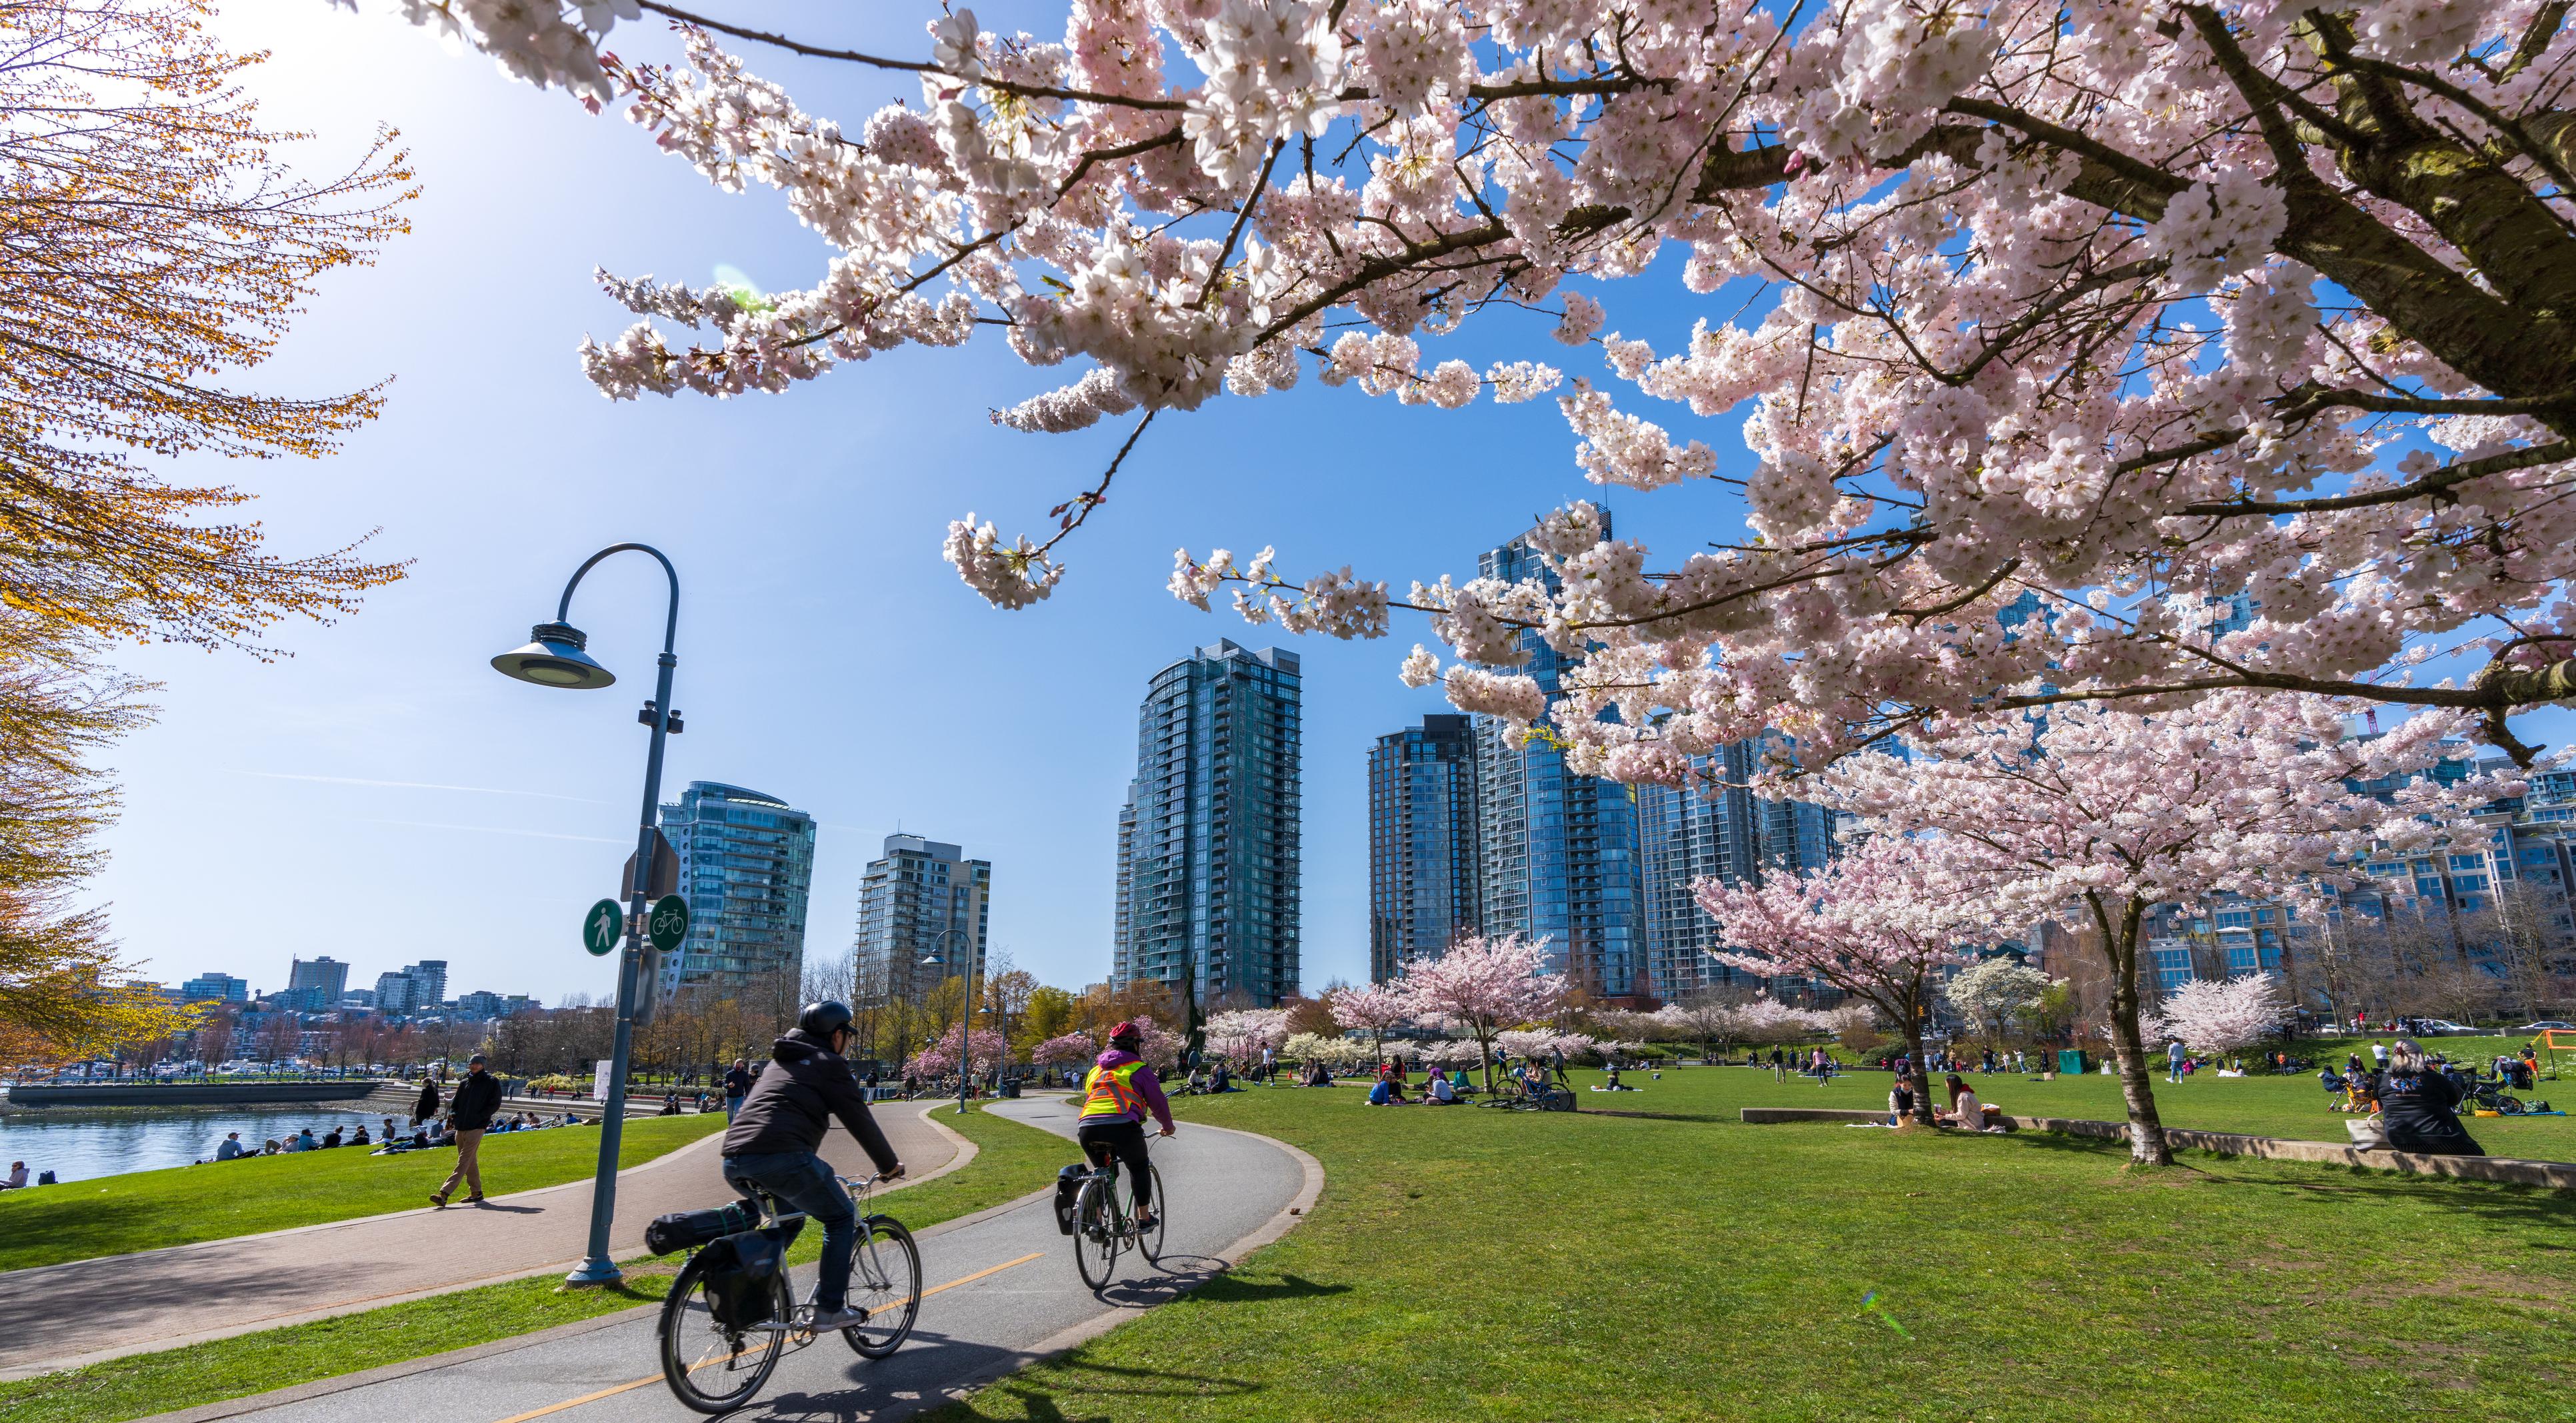 People doing cycling and having a picnic in David Lam Park in springtime